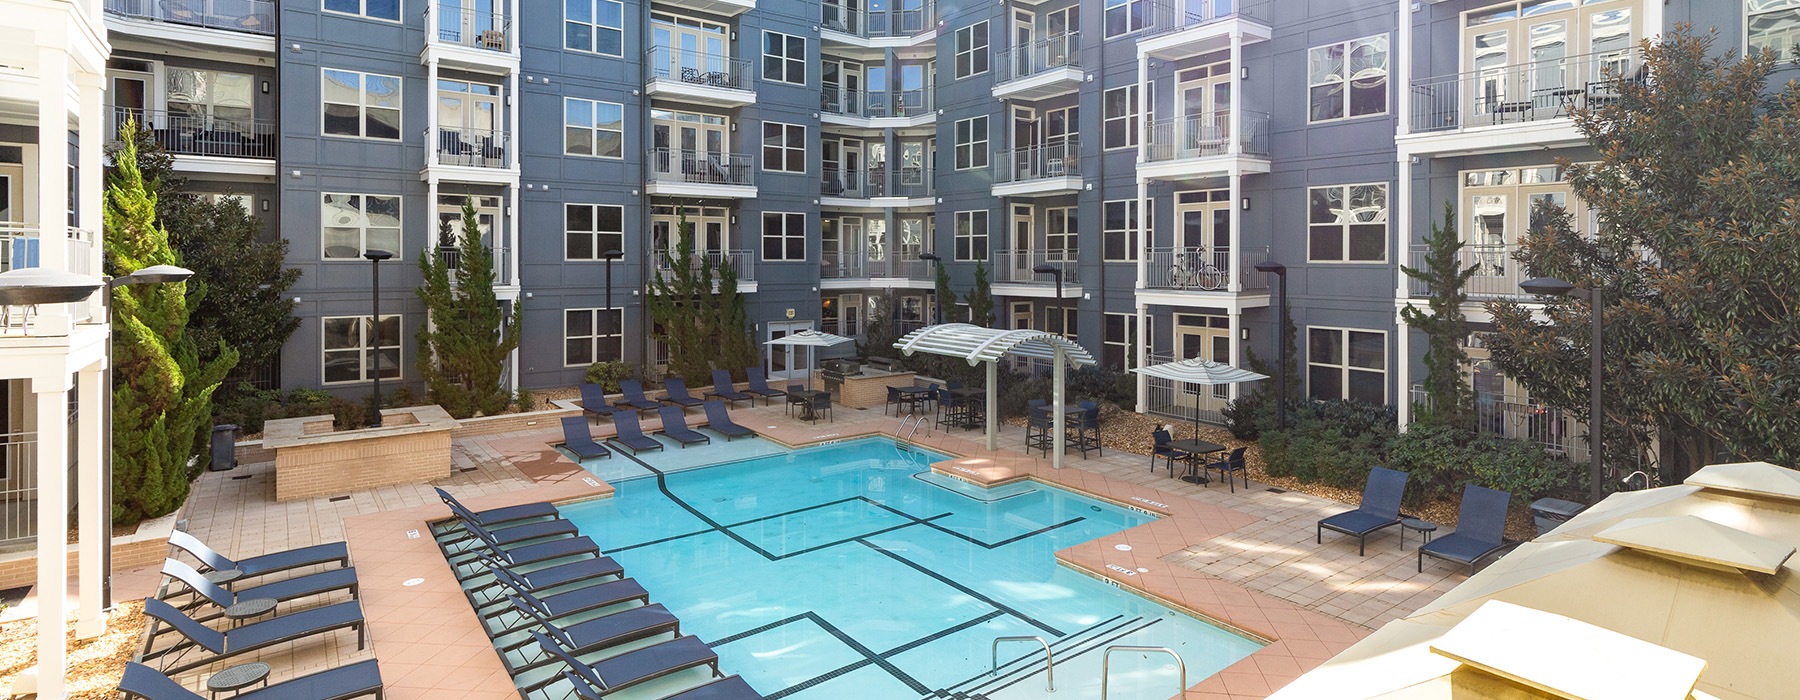 pool with chairs and umbrellas